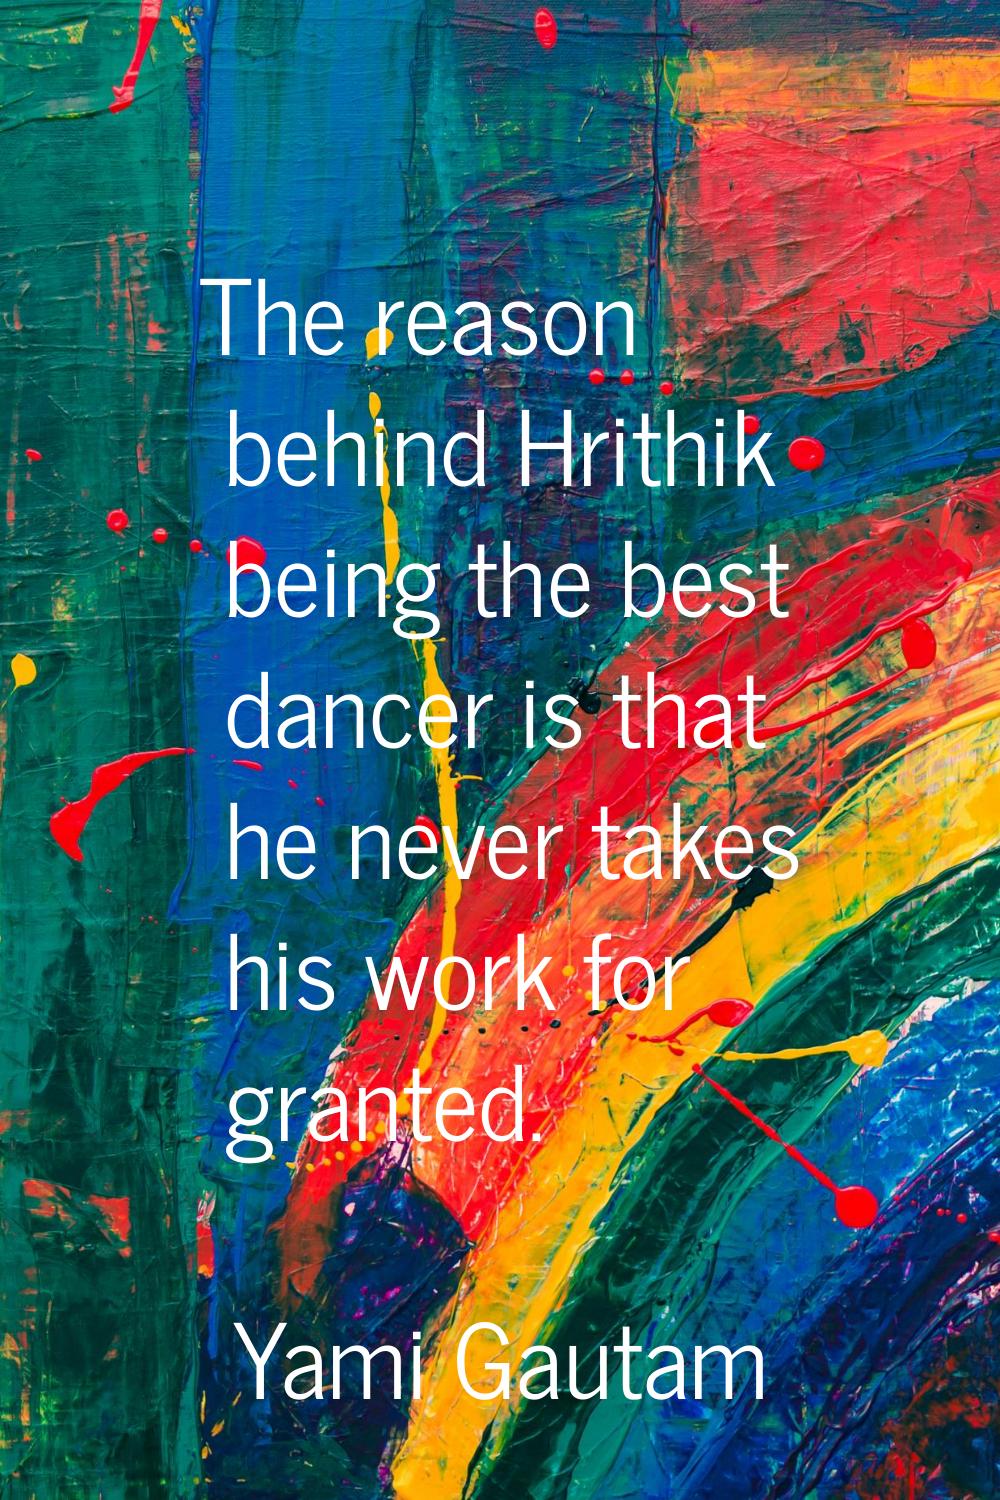 The reason behind Hrithik being the best dancer is that he never takes his work for granted.